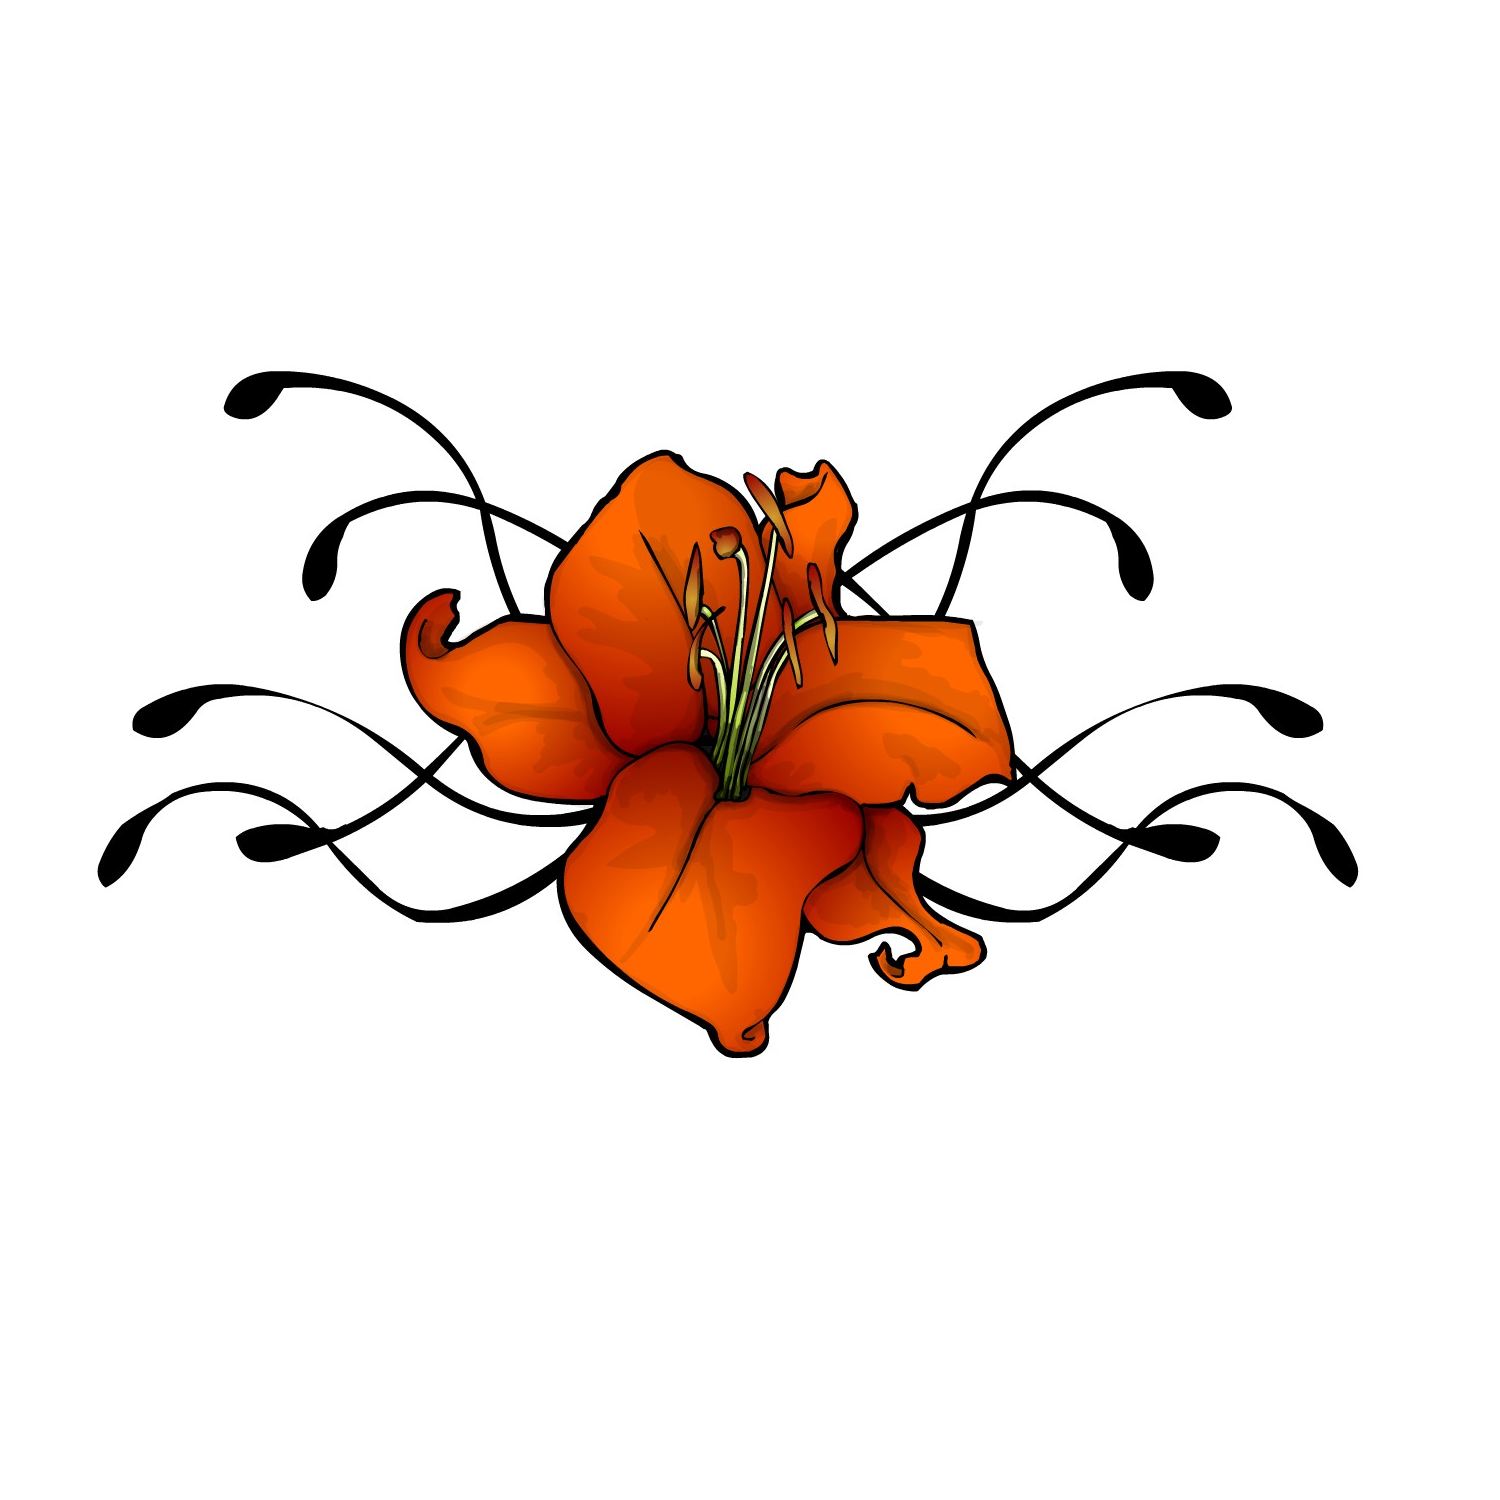 Free Flower Designs Pictures, Download Free Clip Art, Free.